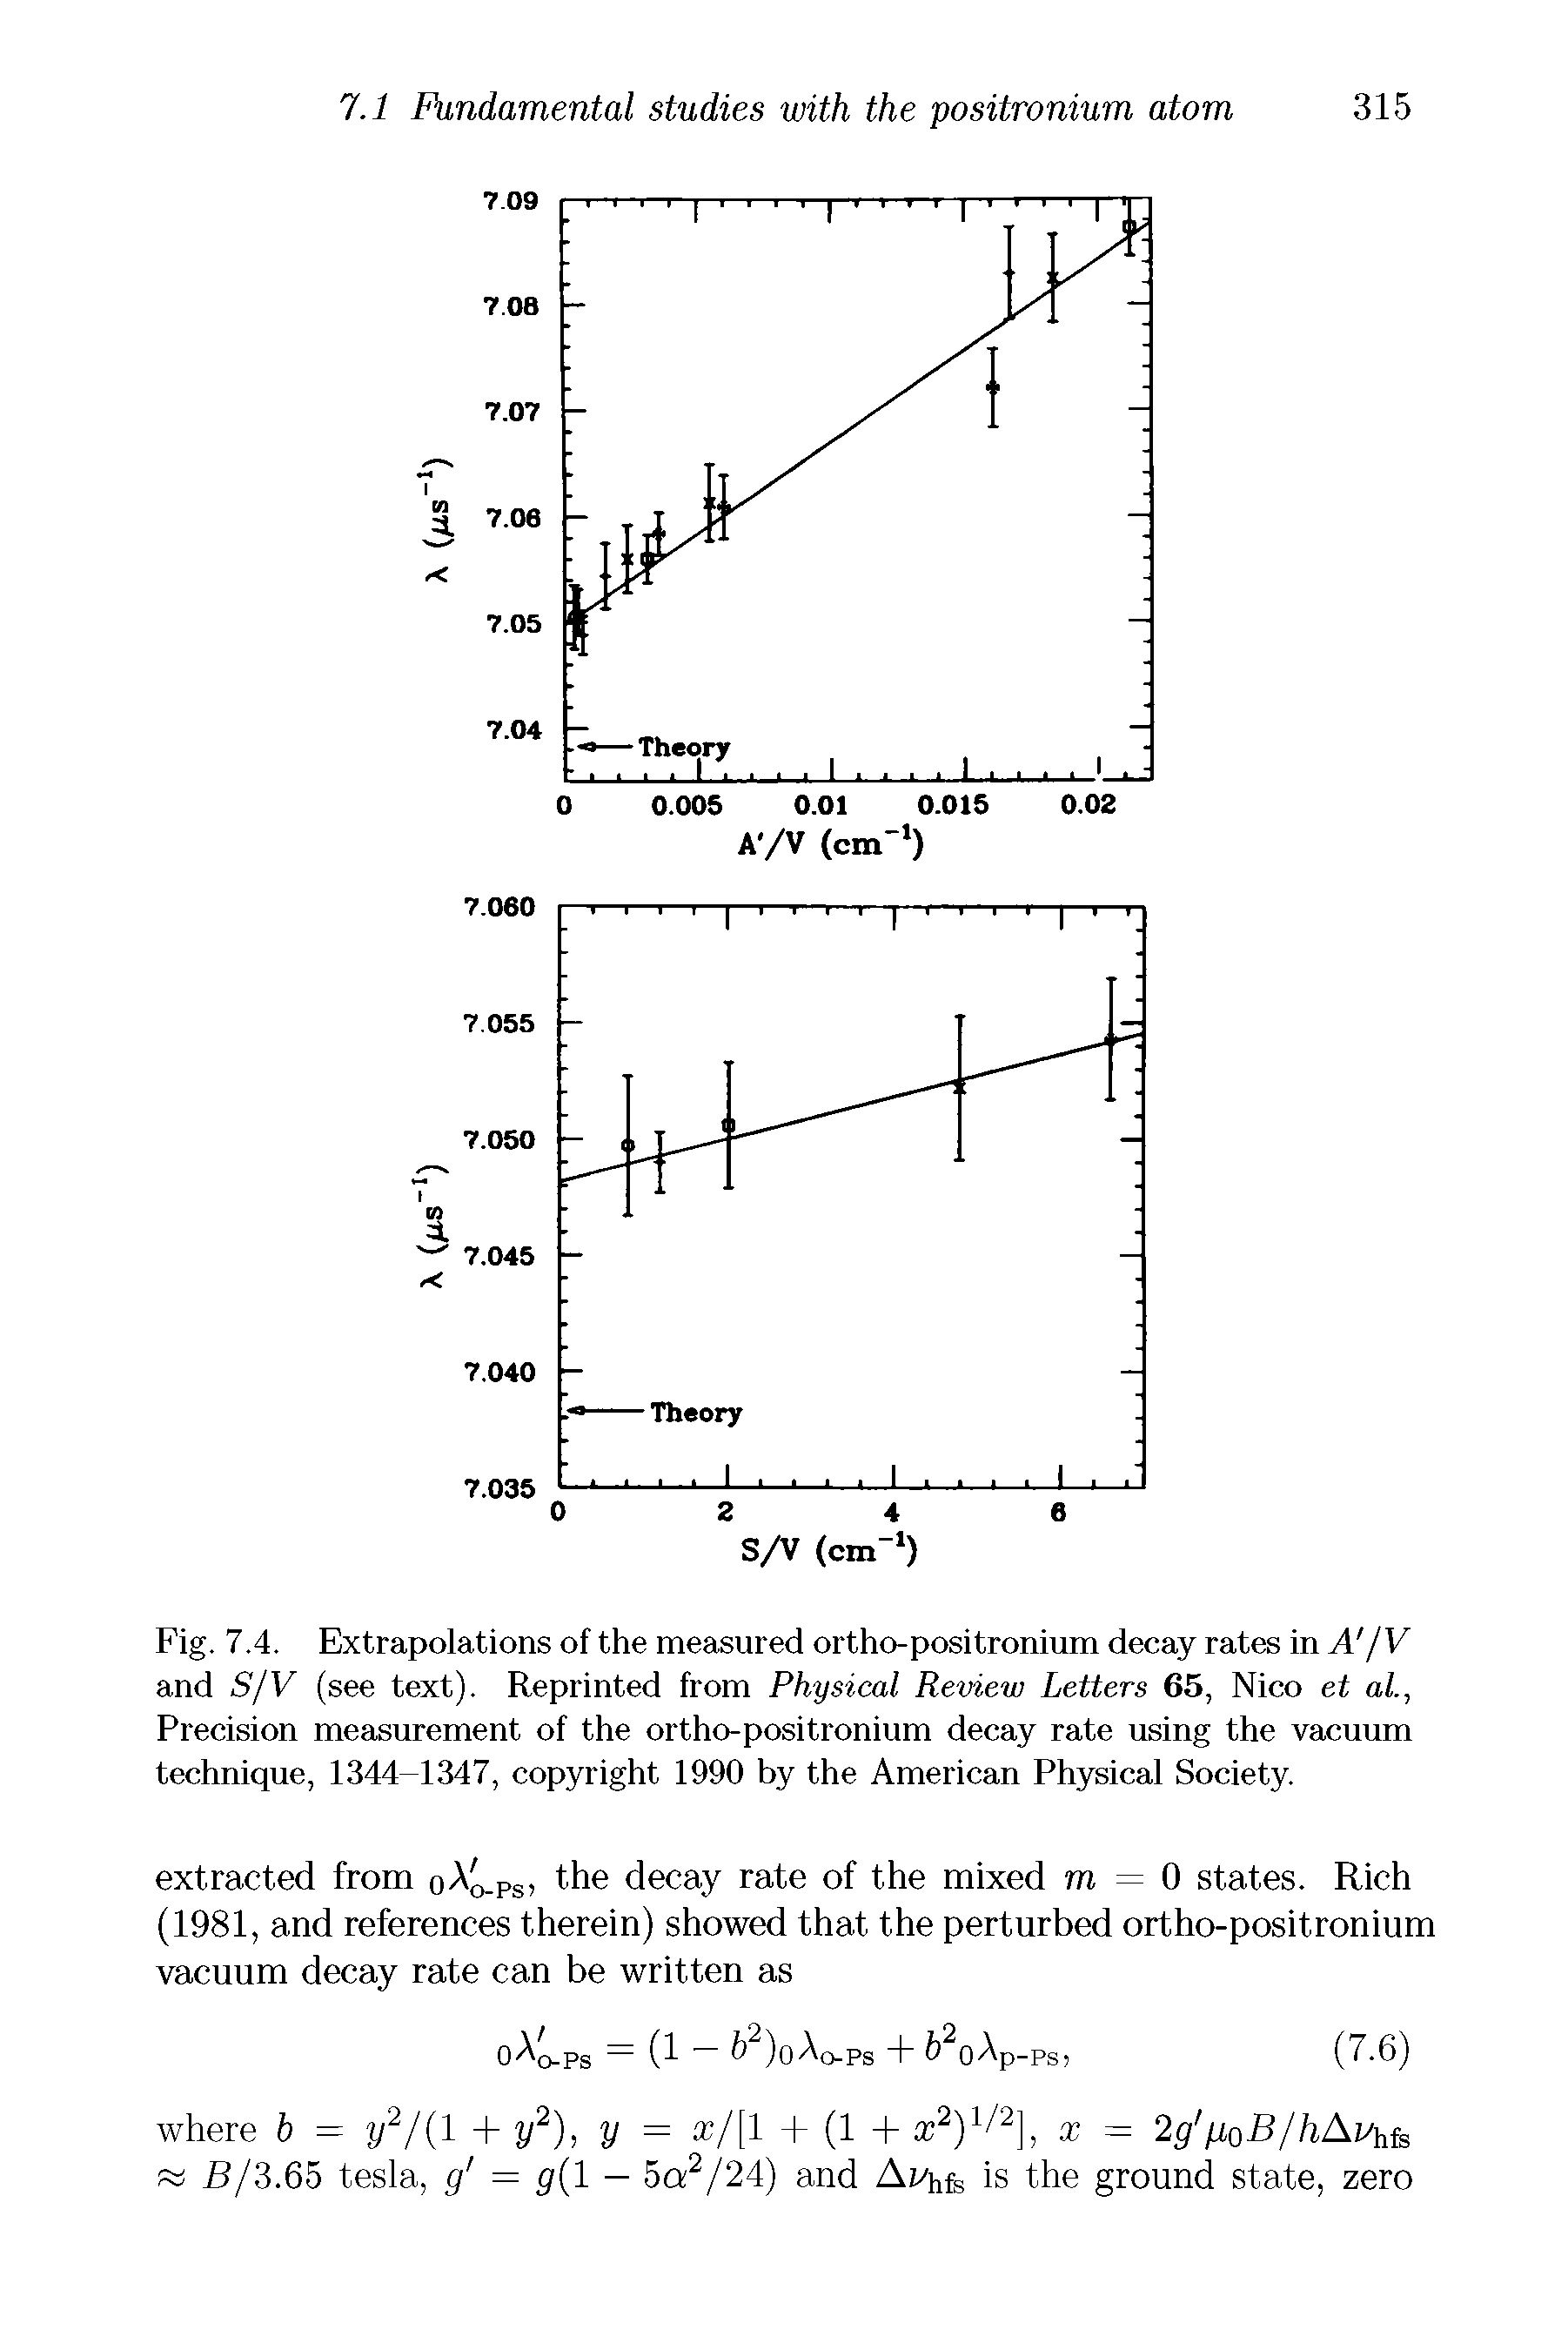 Fig. 7.4. Extrapolations of the measured ortho-positronium decay rates in A /V and S/V (see text). Reprinted from Physical Review Letters 65, Nico el at, Precision measurement of the ortho-positronium decay rate using the vacuum technique, 1344-1347, copyright 1990 by the American Physical Society.